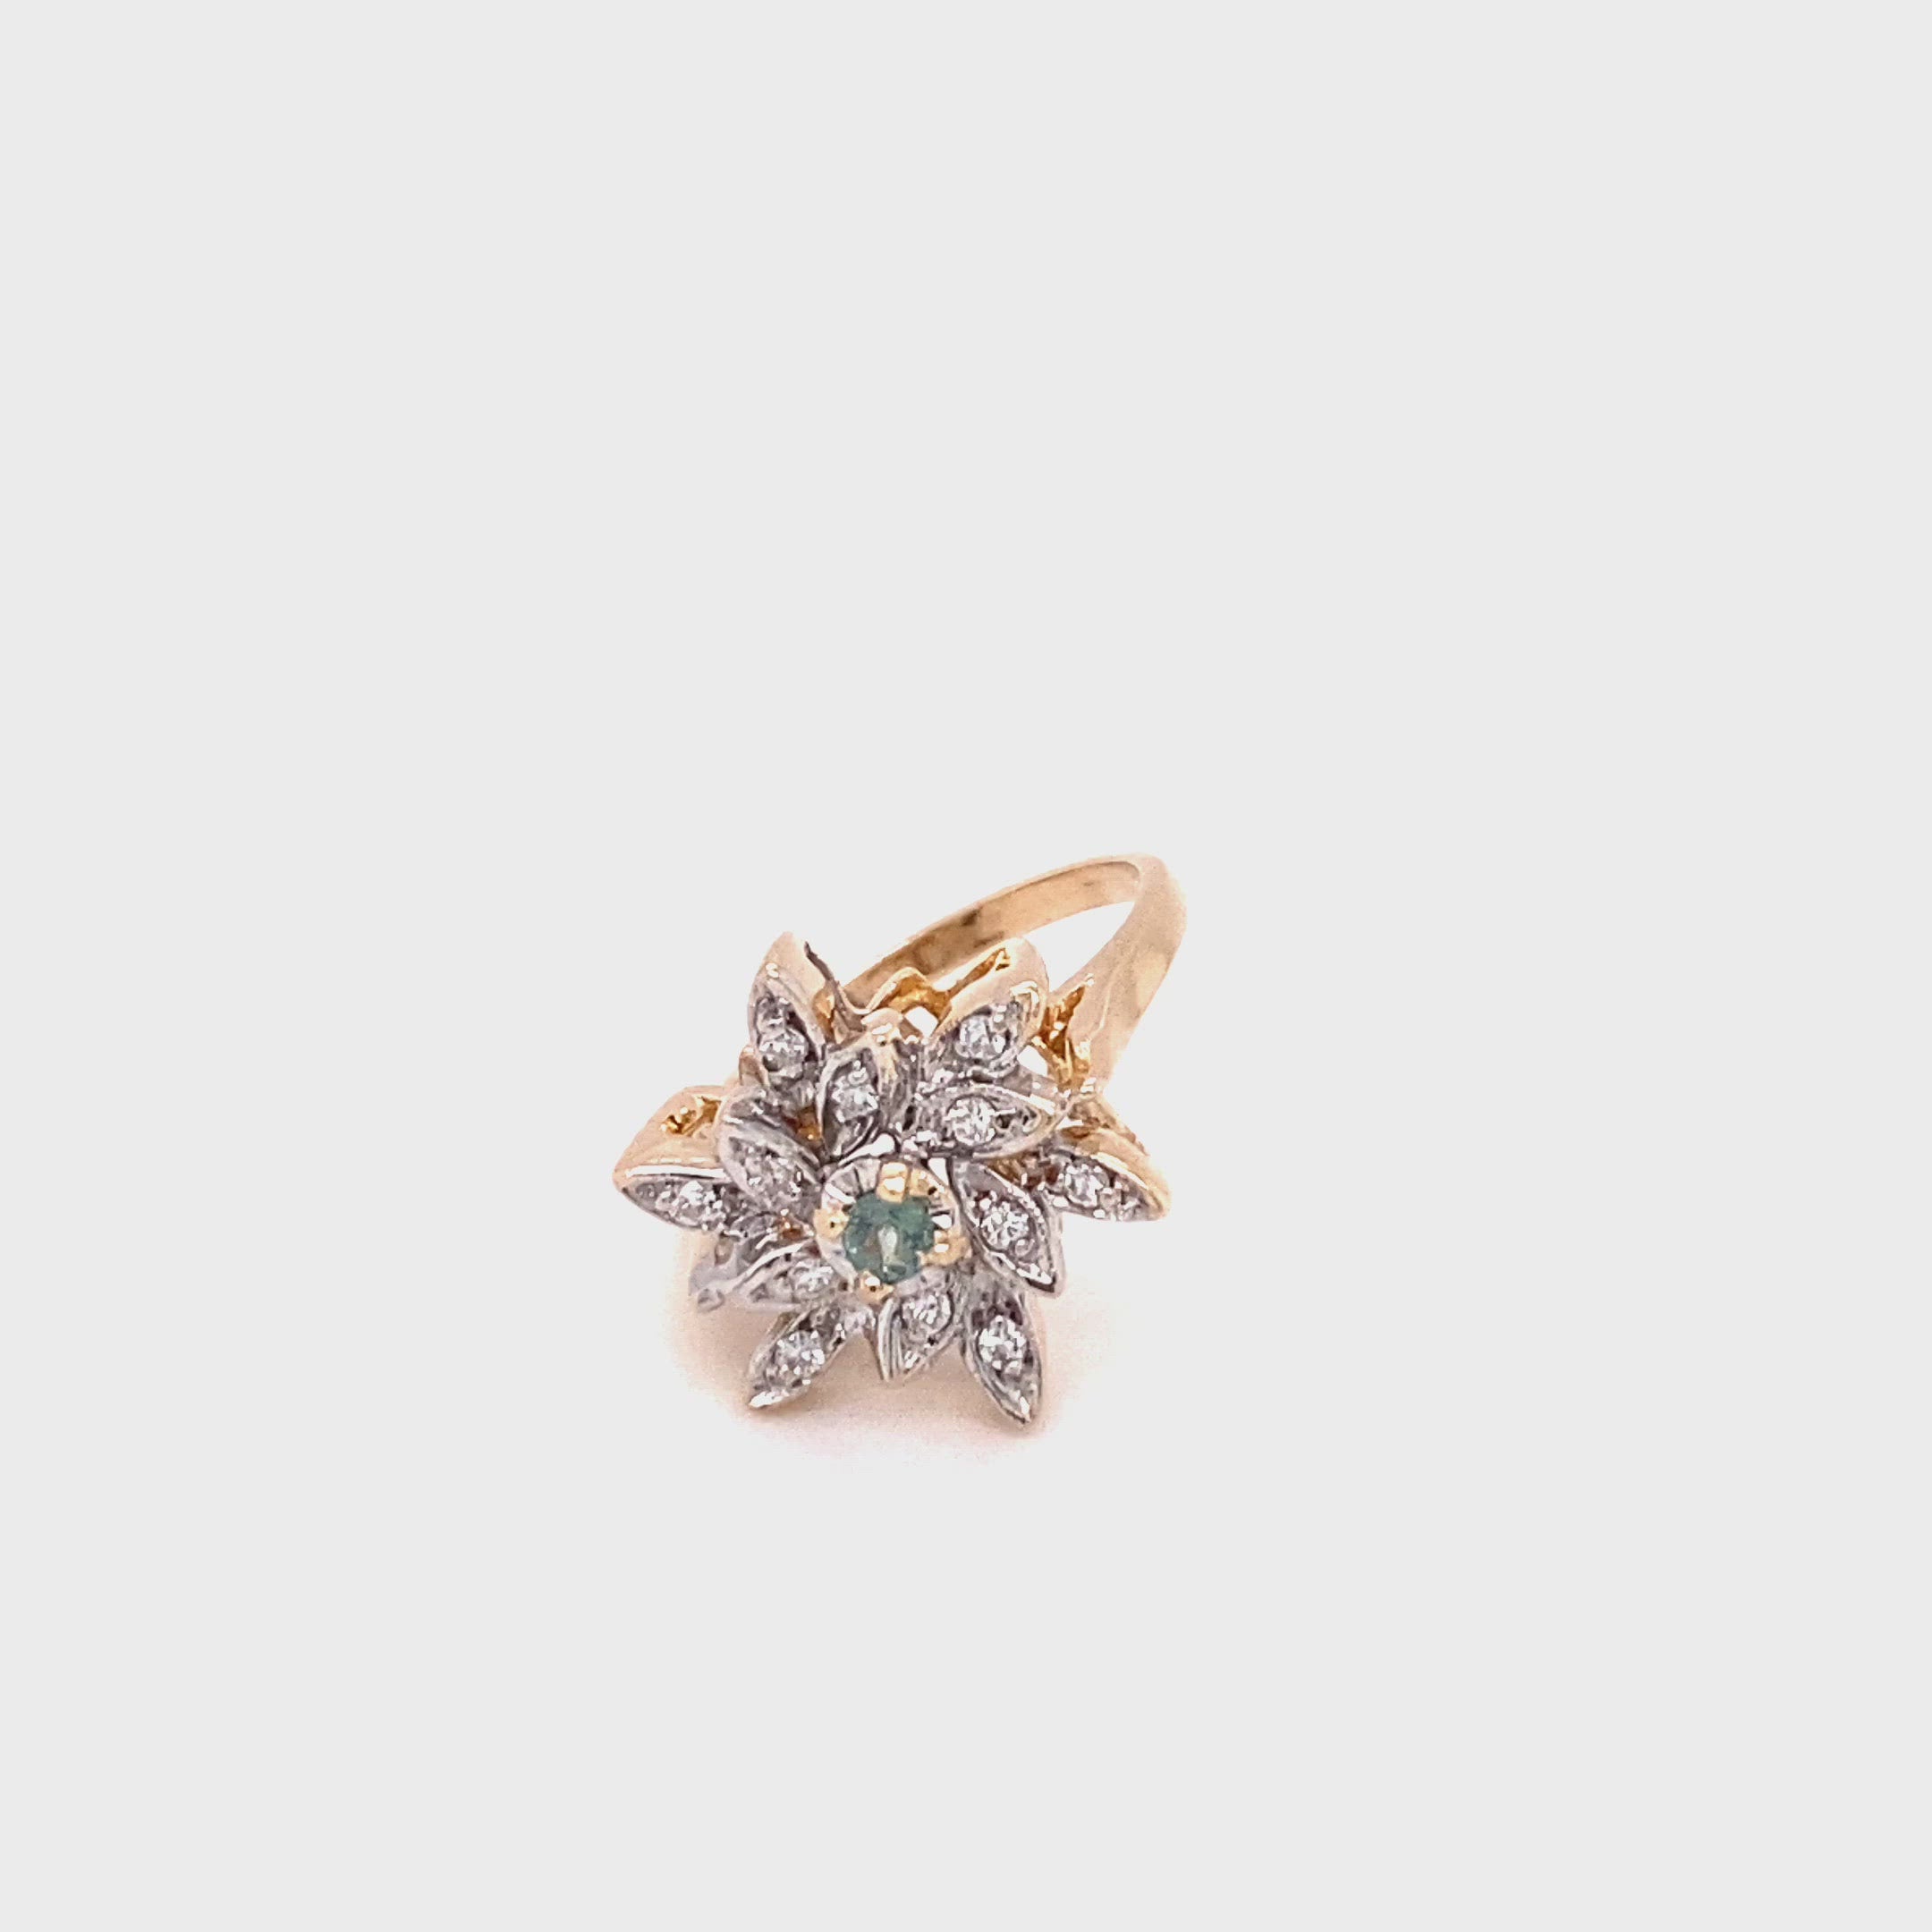 Natural Alexandrite & Diamond Ring 14K Solid Gold .24tcw Flower Ring Statement Ring Cluster Ring Vintage Ring Alexandrite Ring Estate Ring